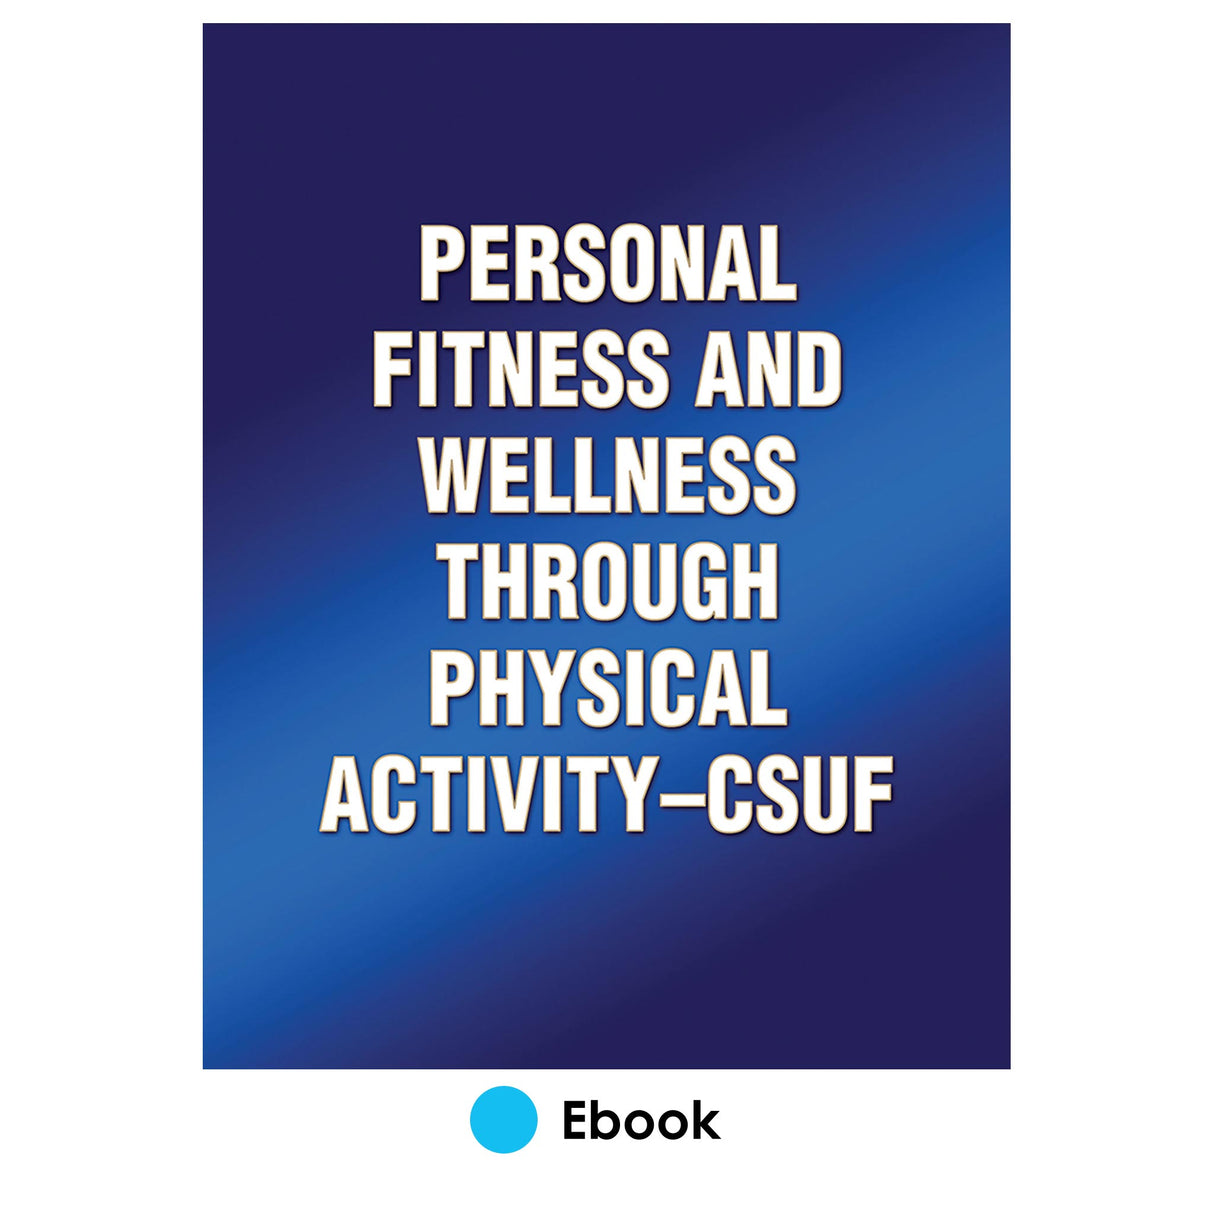 Personal Fitness and Wellness Through Physical Activity-CSUF